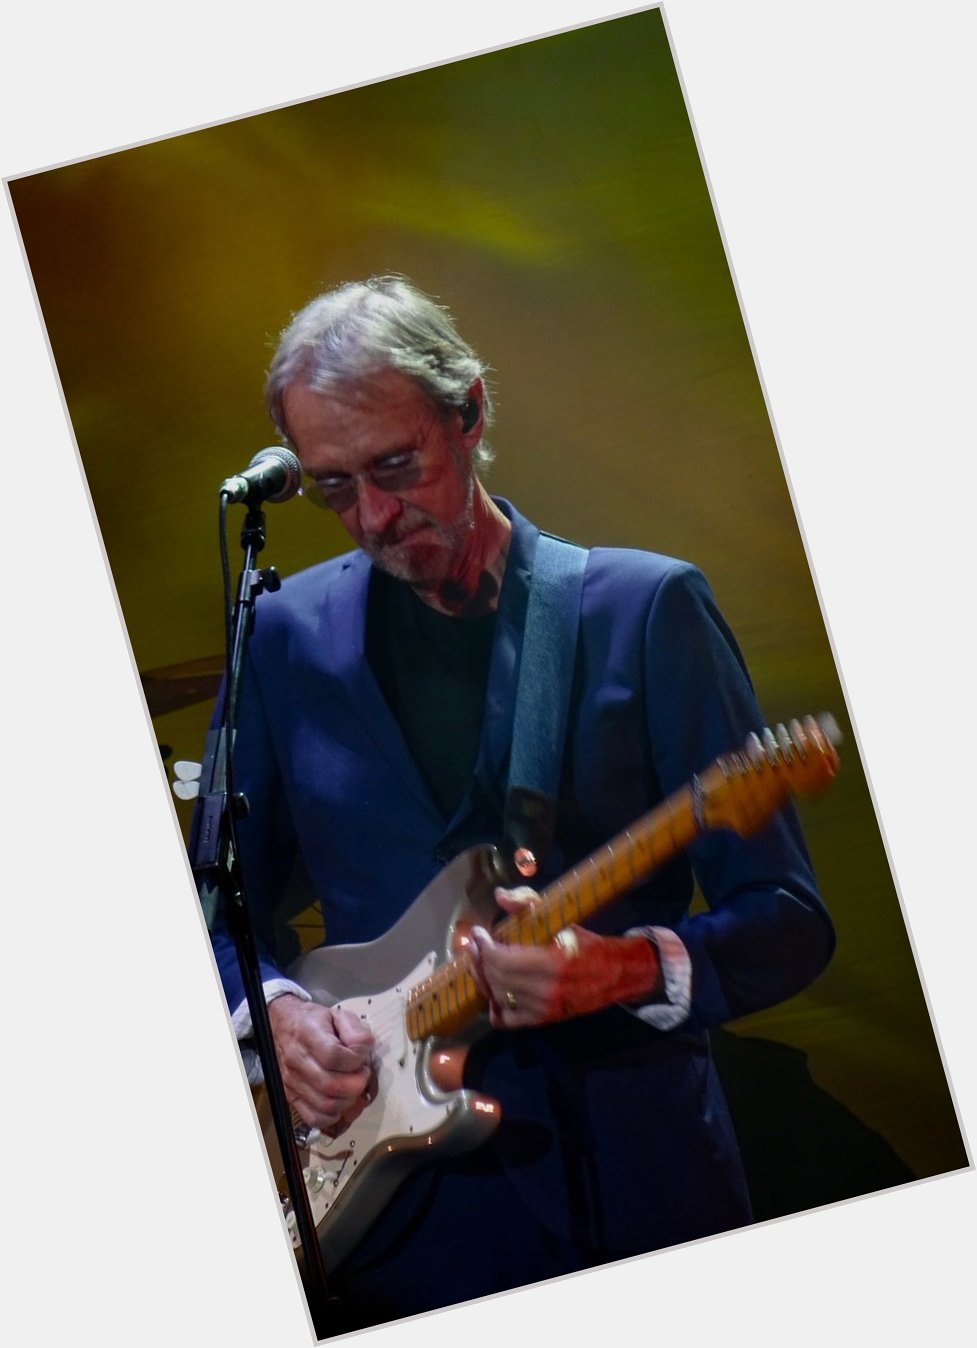 I knew I had a picture of Mike somewhere in my archives from 2019 Happy Birthday Mike Rutherford 